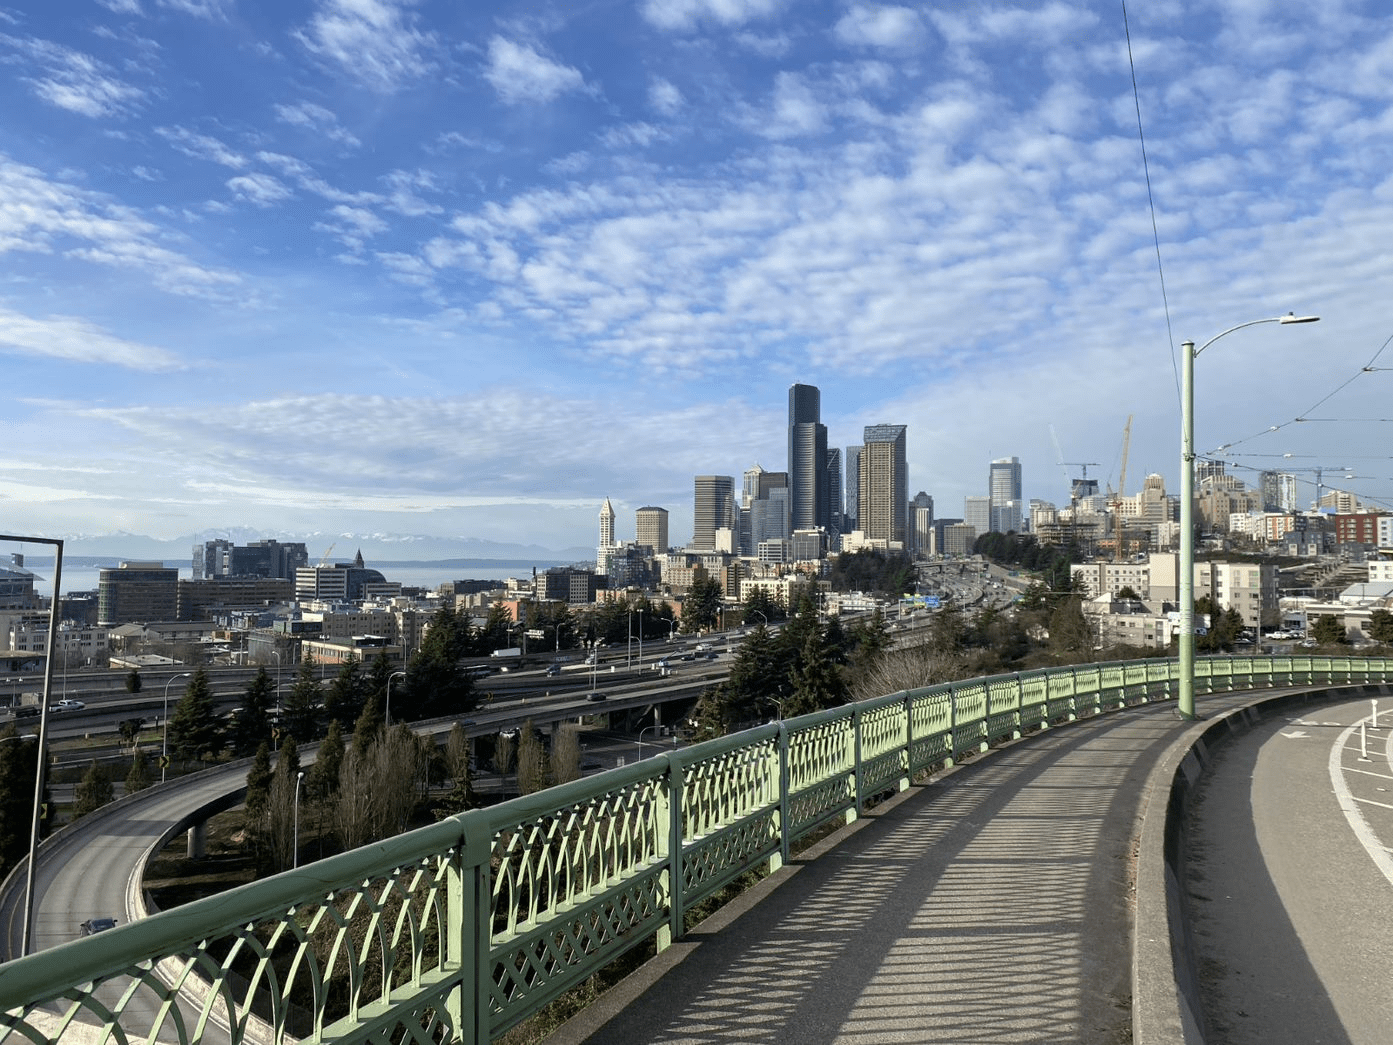 A photo taken from the pedestrian pathway on the Jose Rizal Bridge over S Dearborn Street facing north toward downtown Seattle